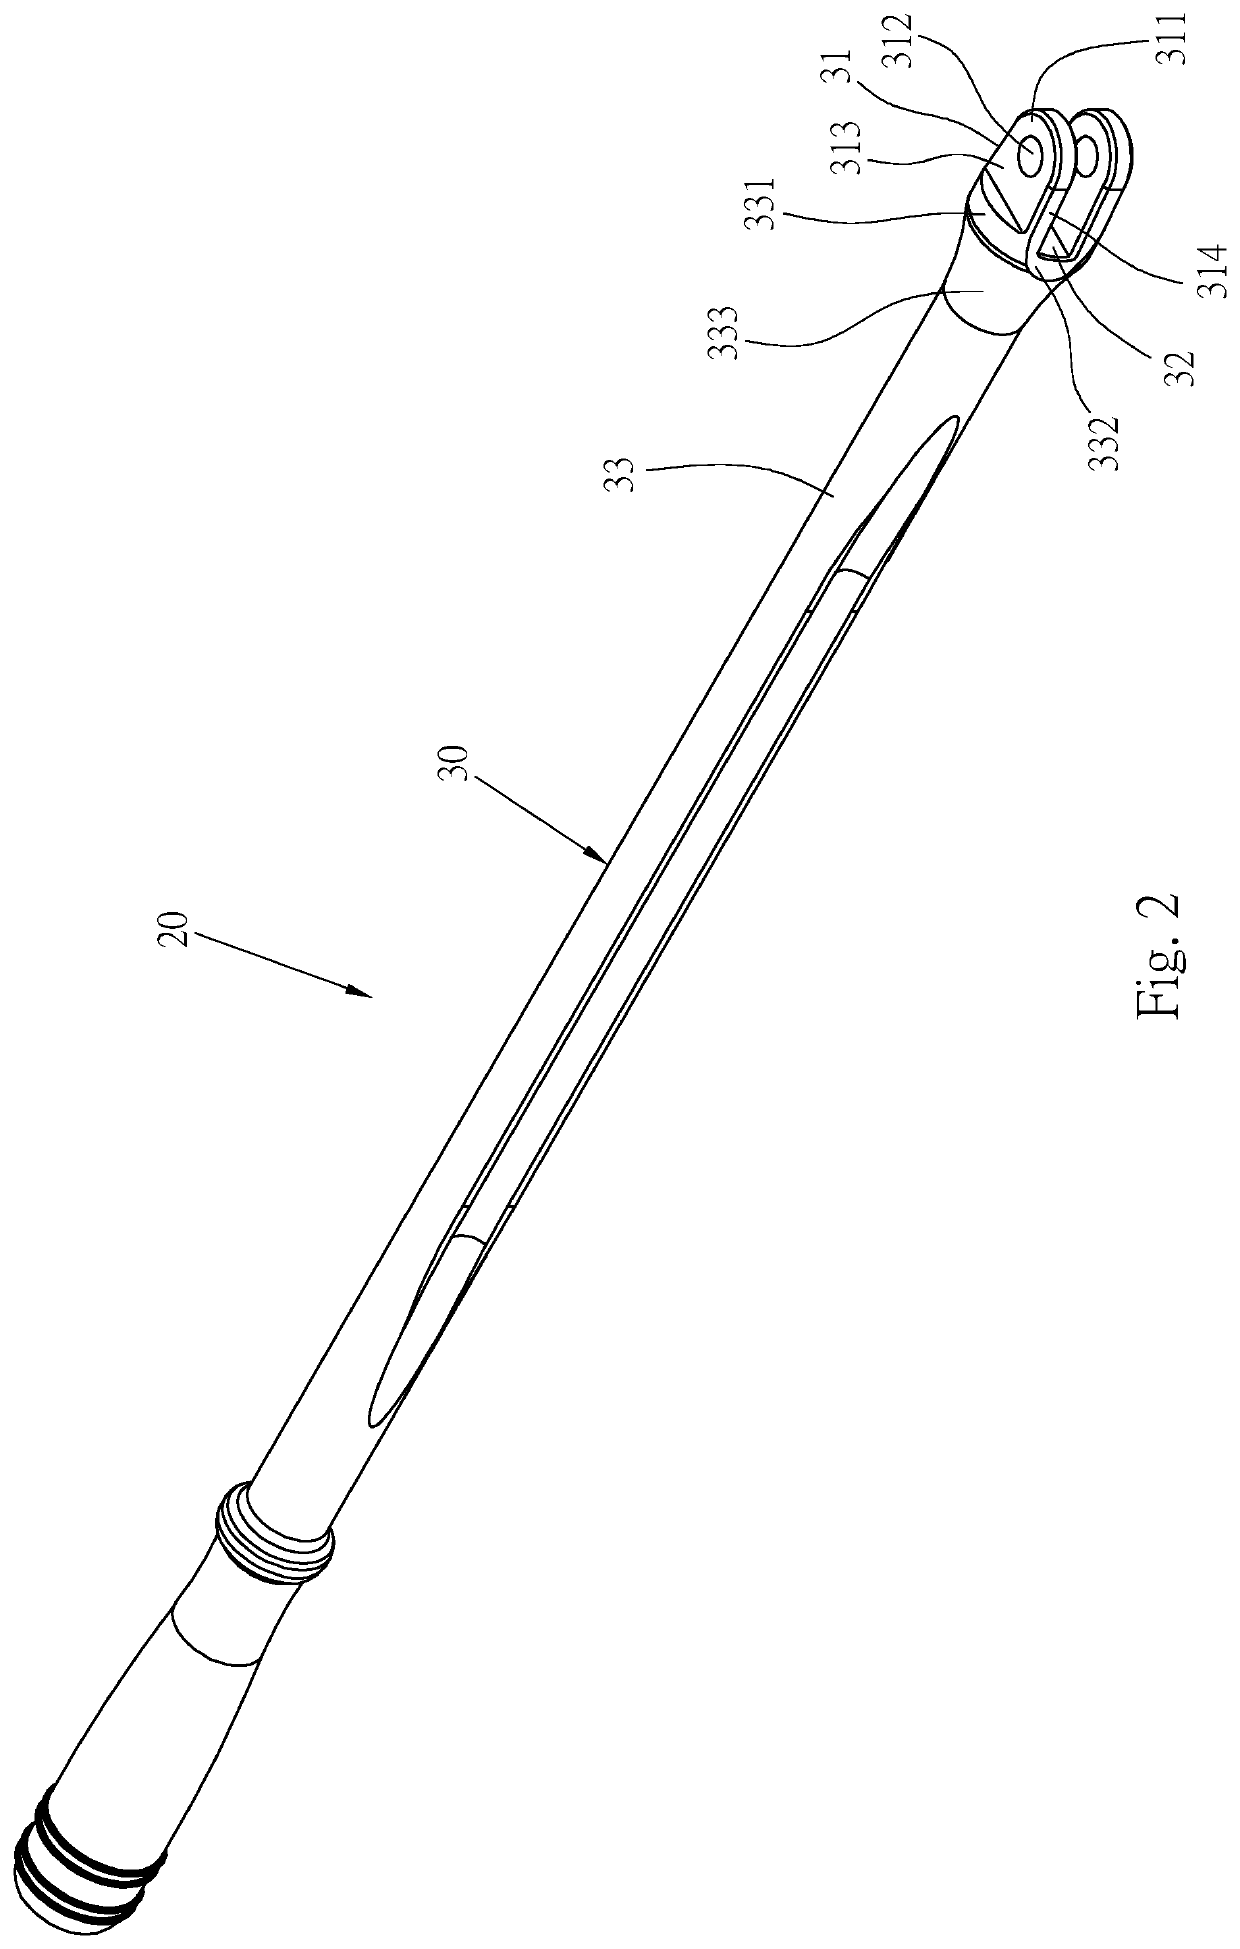 Ear structure of operating rod